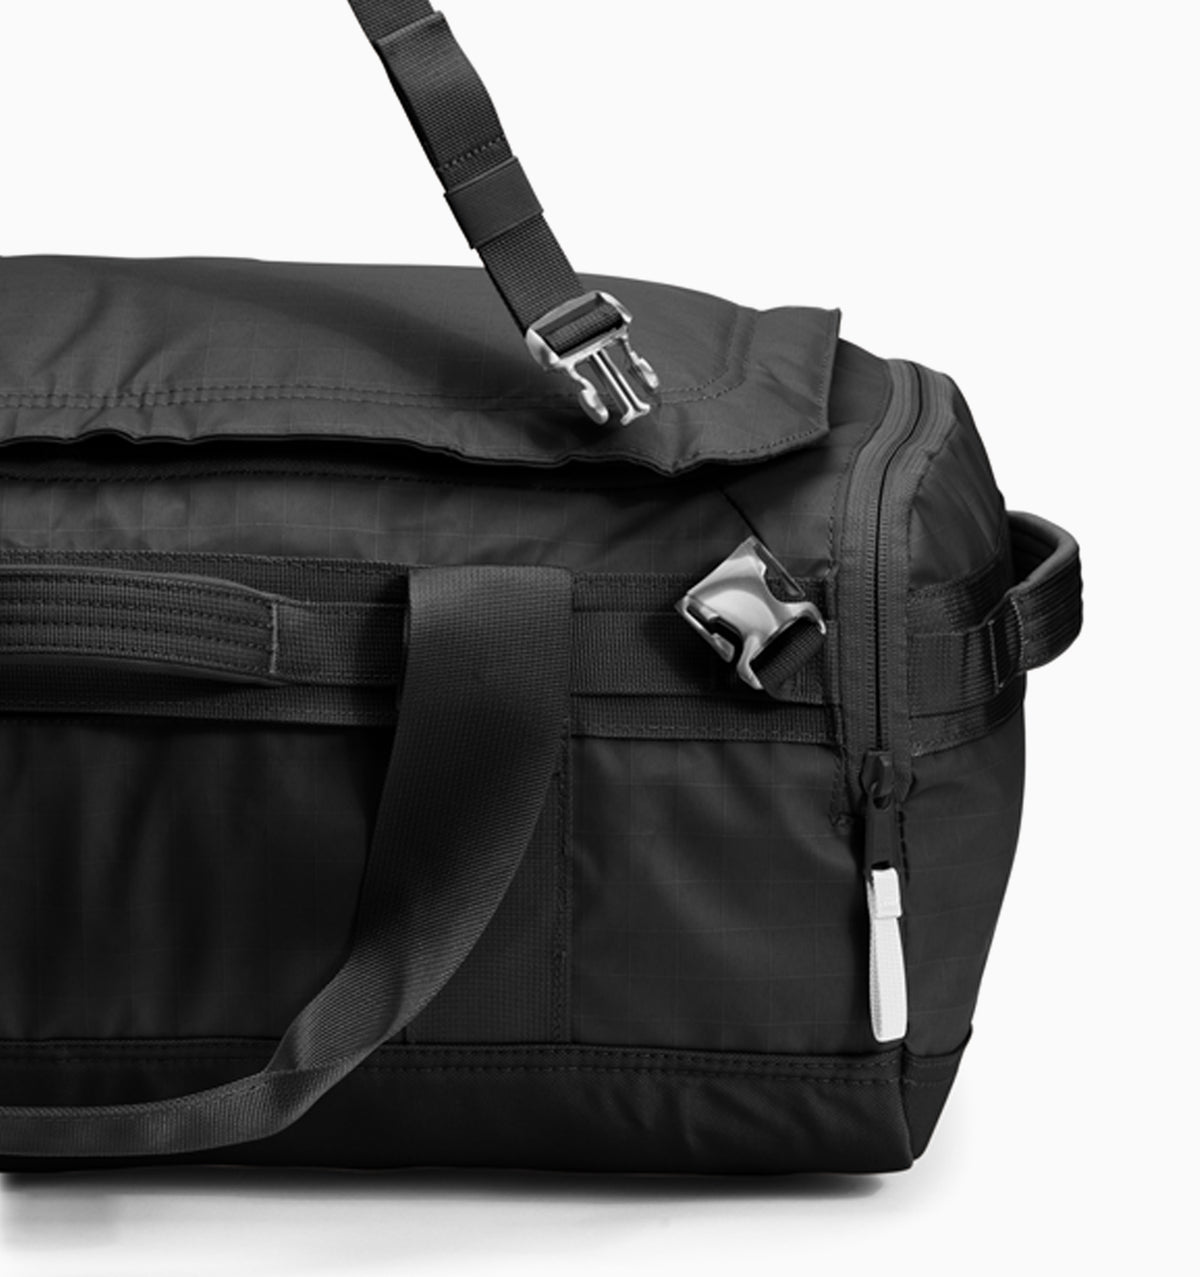 The North Face Base Camp Voyager Duffel 42L - Black